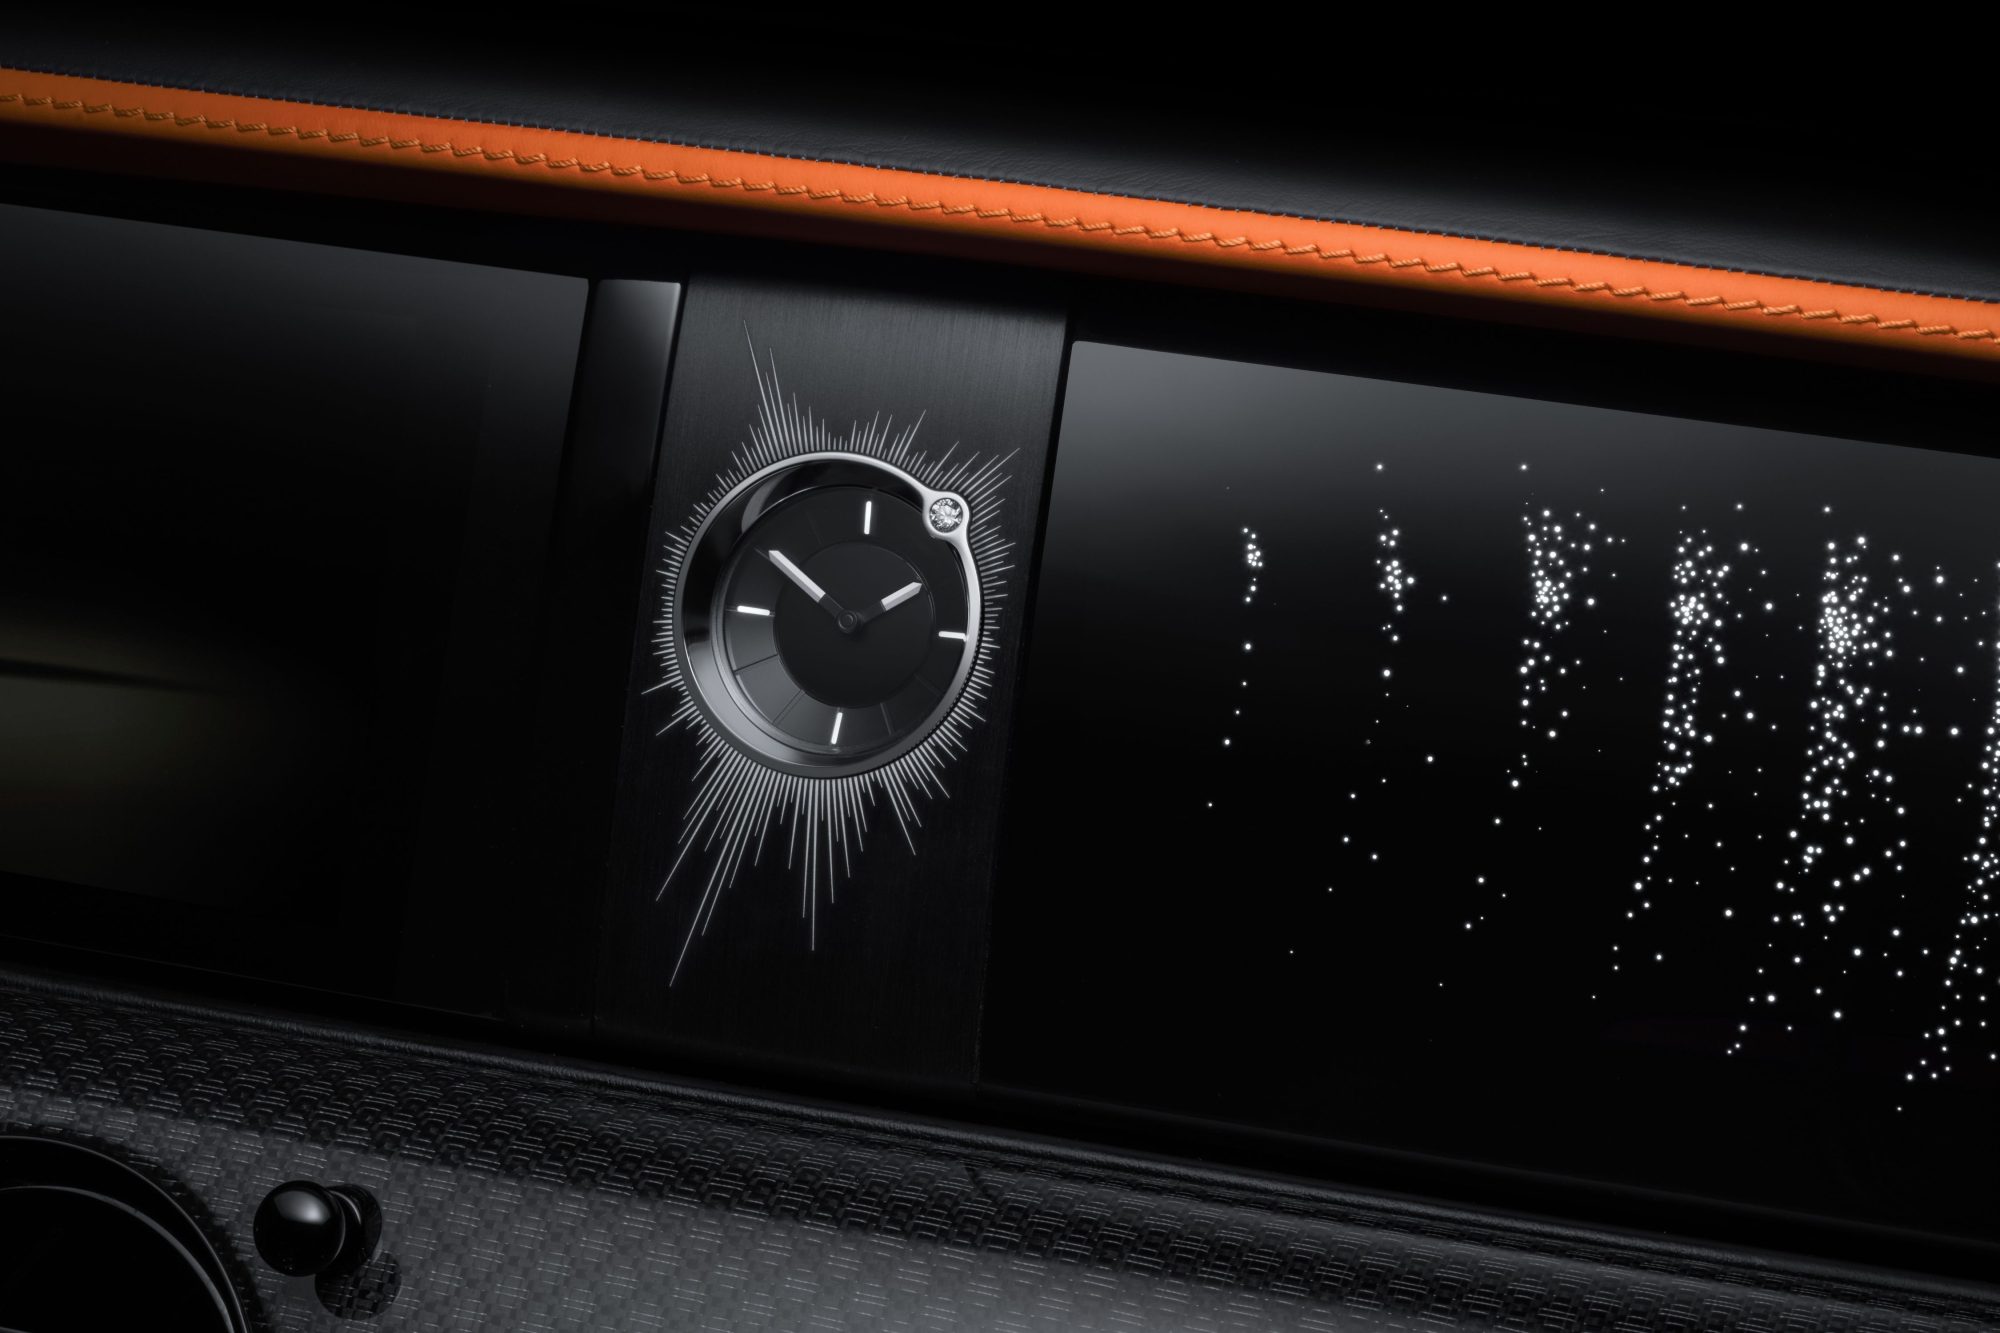 Introducing the Rolls-Royce Black Badge Ghost Ékleipsis Private Collection